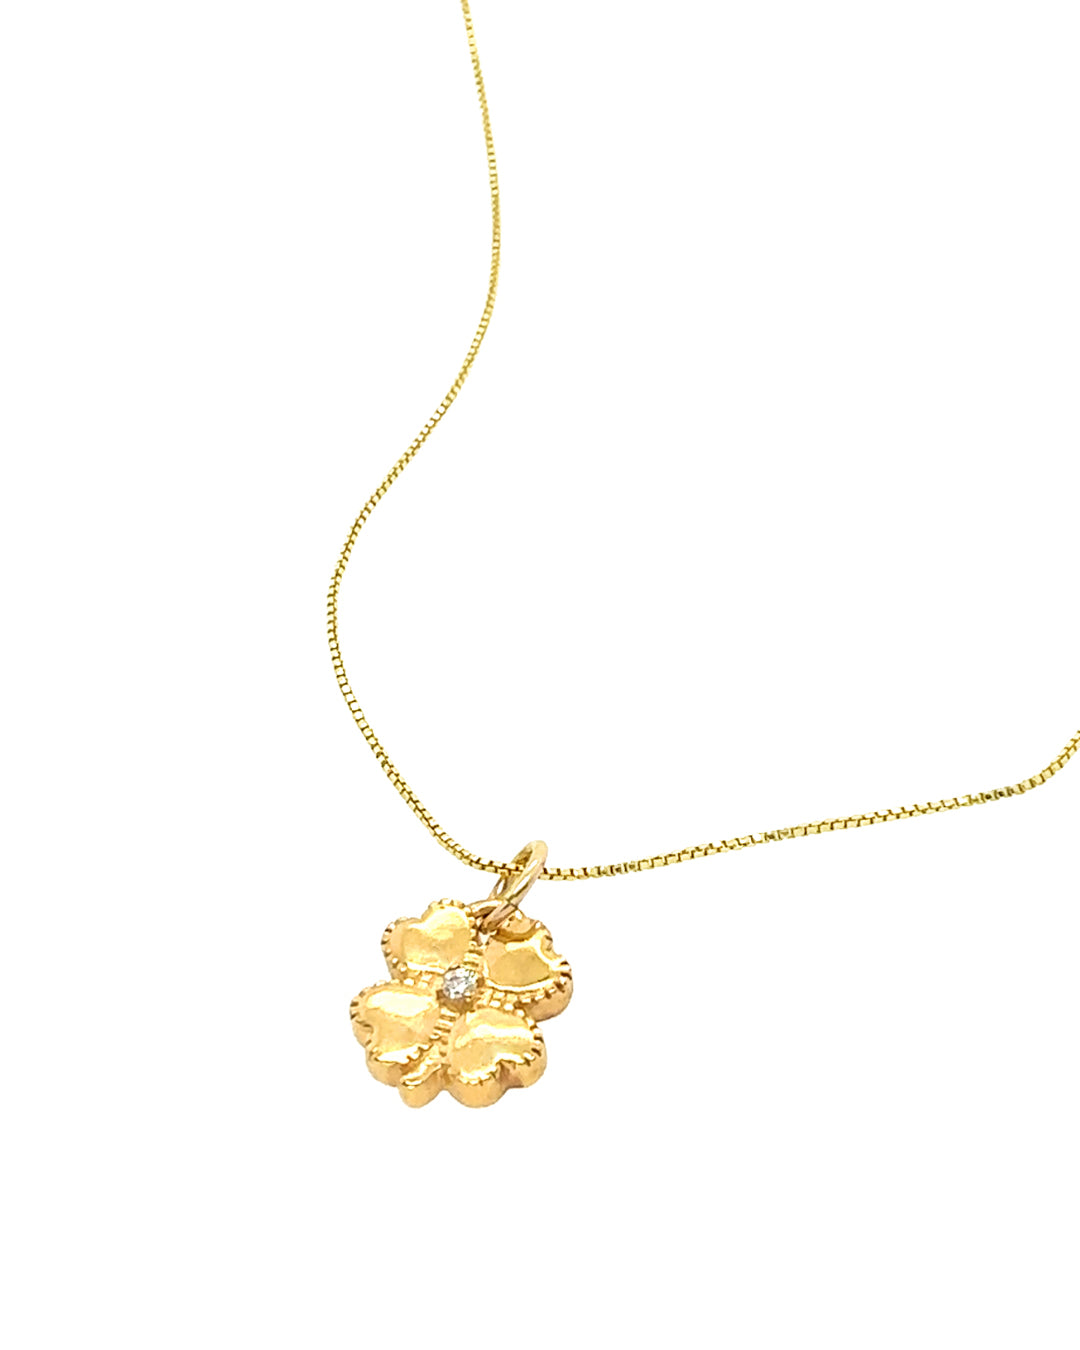 Gold fill clover blossom flower talisman protection pendant on a gold necklace chain